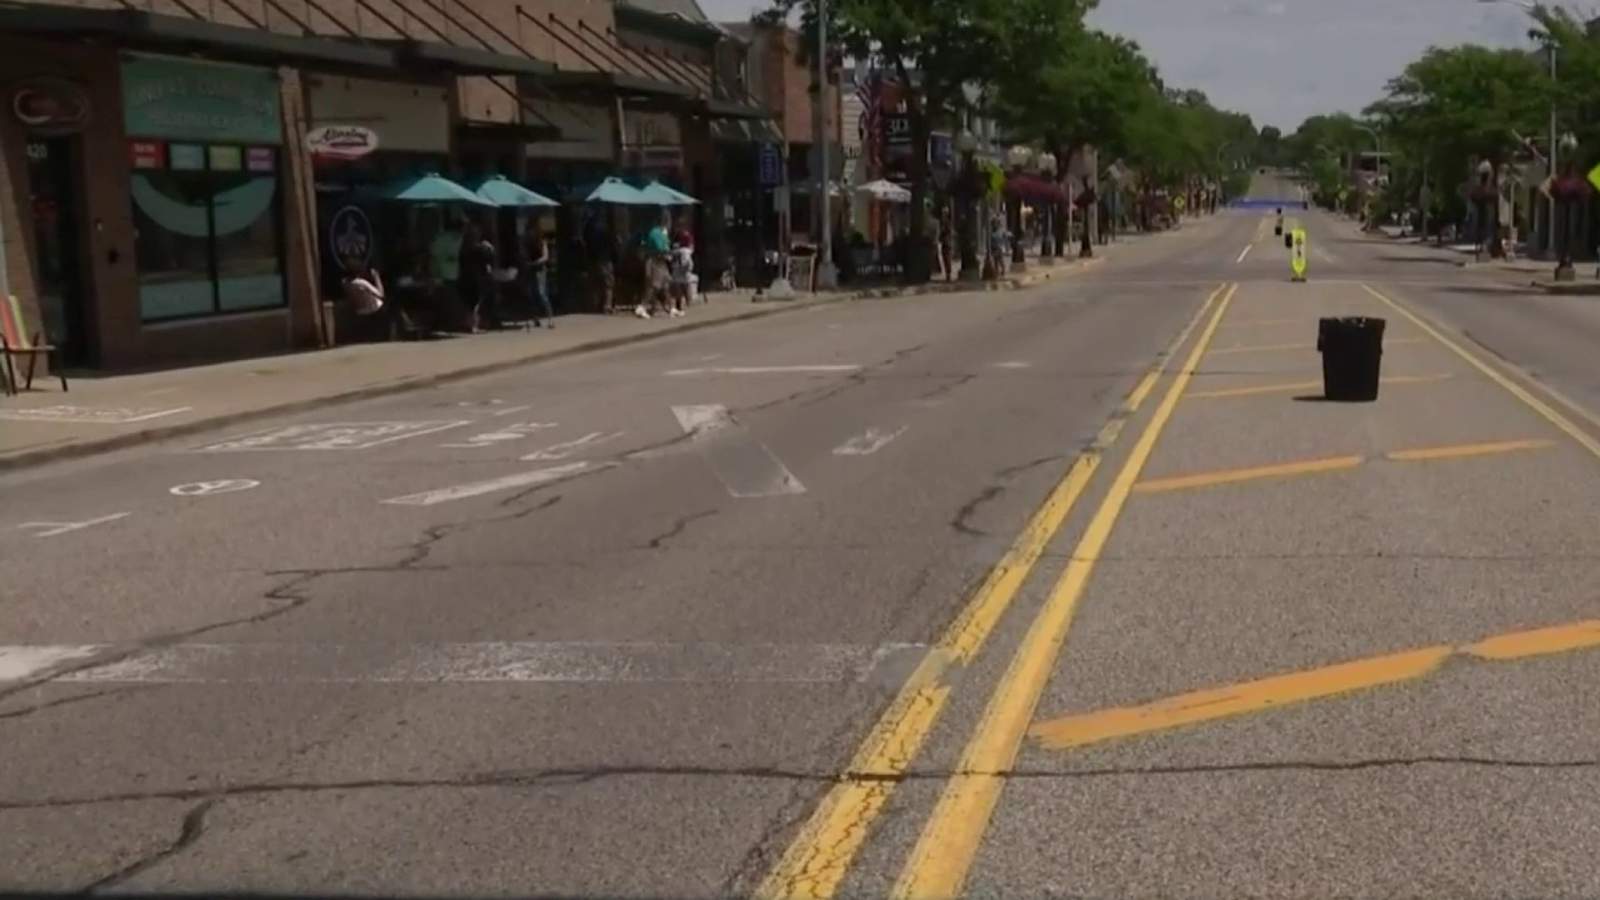 These 4 Metro Detroit cities are closing streets to give restaurants more outdoor dining space